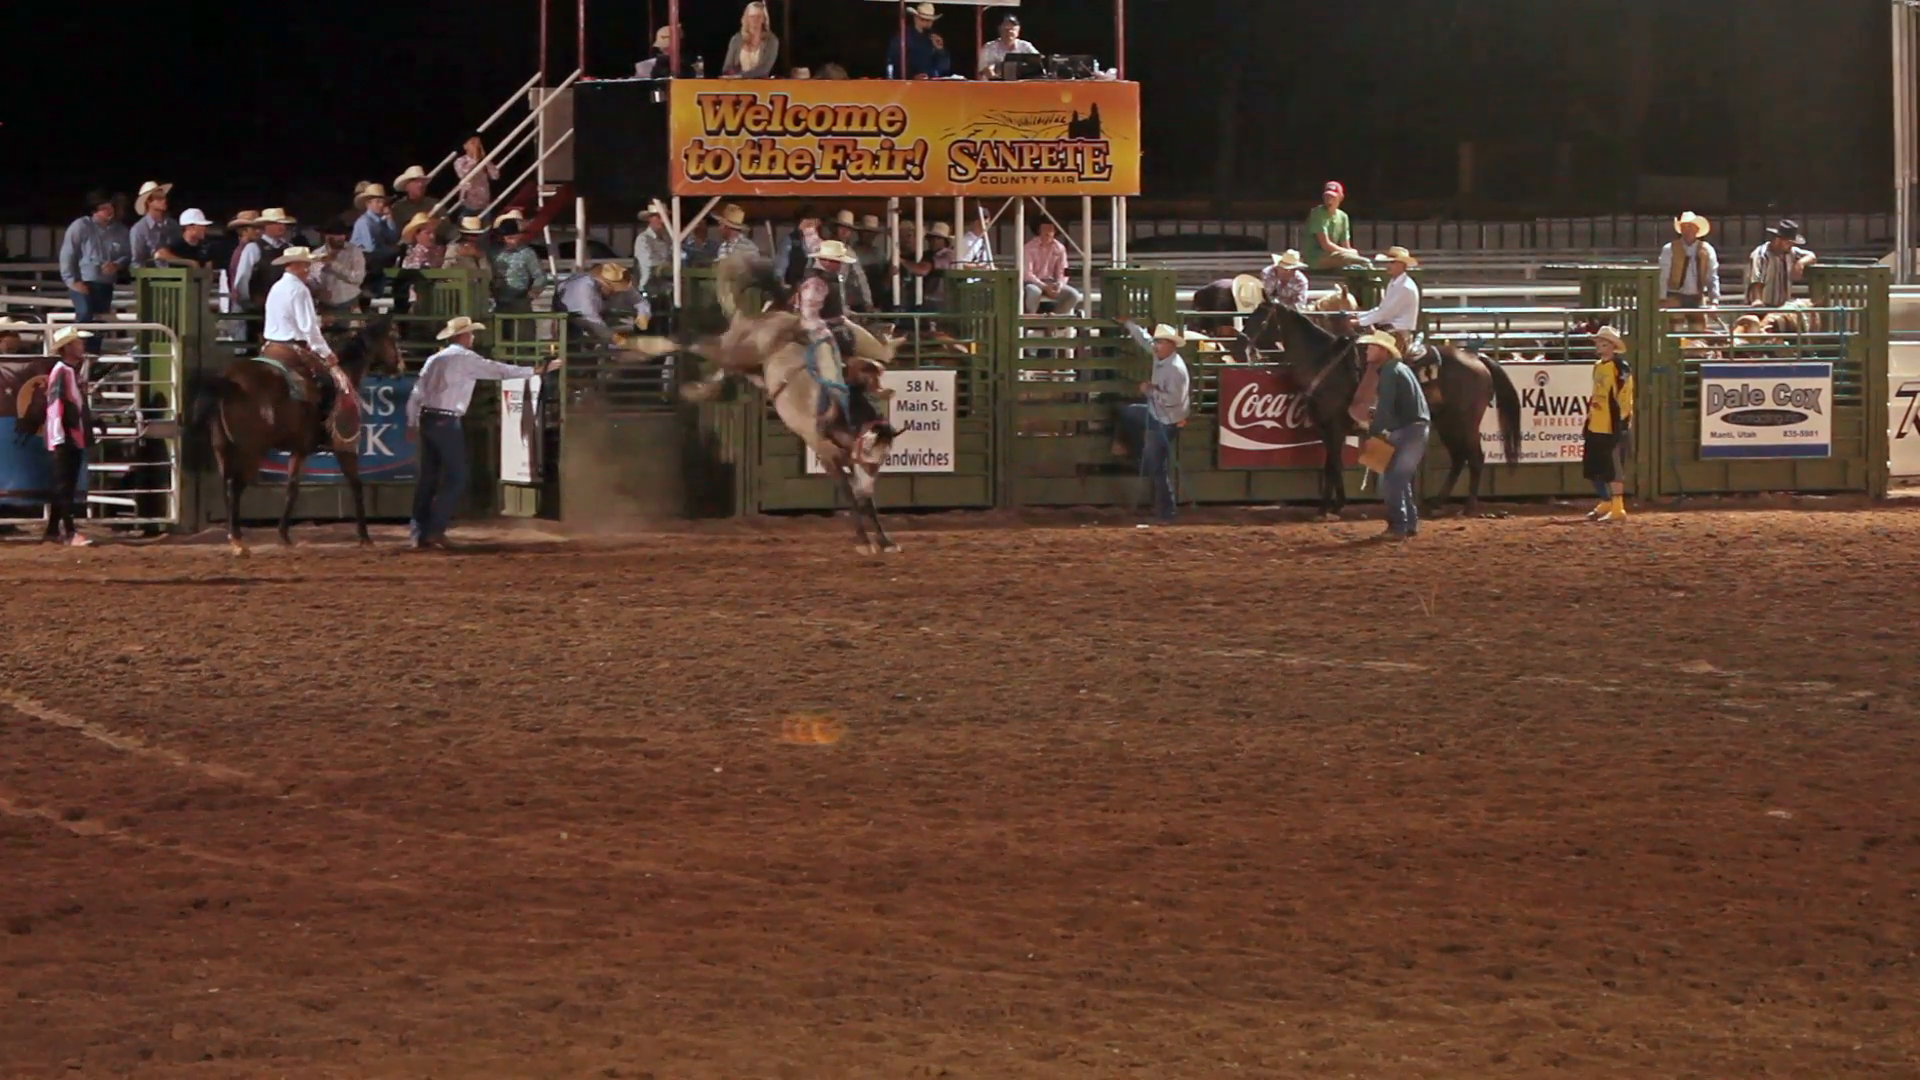 Rodeo Saddle Bronco Horse Ride Gets Rough Ride Out Of Chute With A Hard Landing Slow Motion. Night Time Event In Central Utah. Cowboy Rides Hard Riding Hdpng.com  - Rodeo, Transparent background PNG HD thumbnail